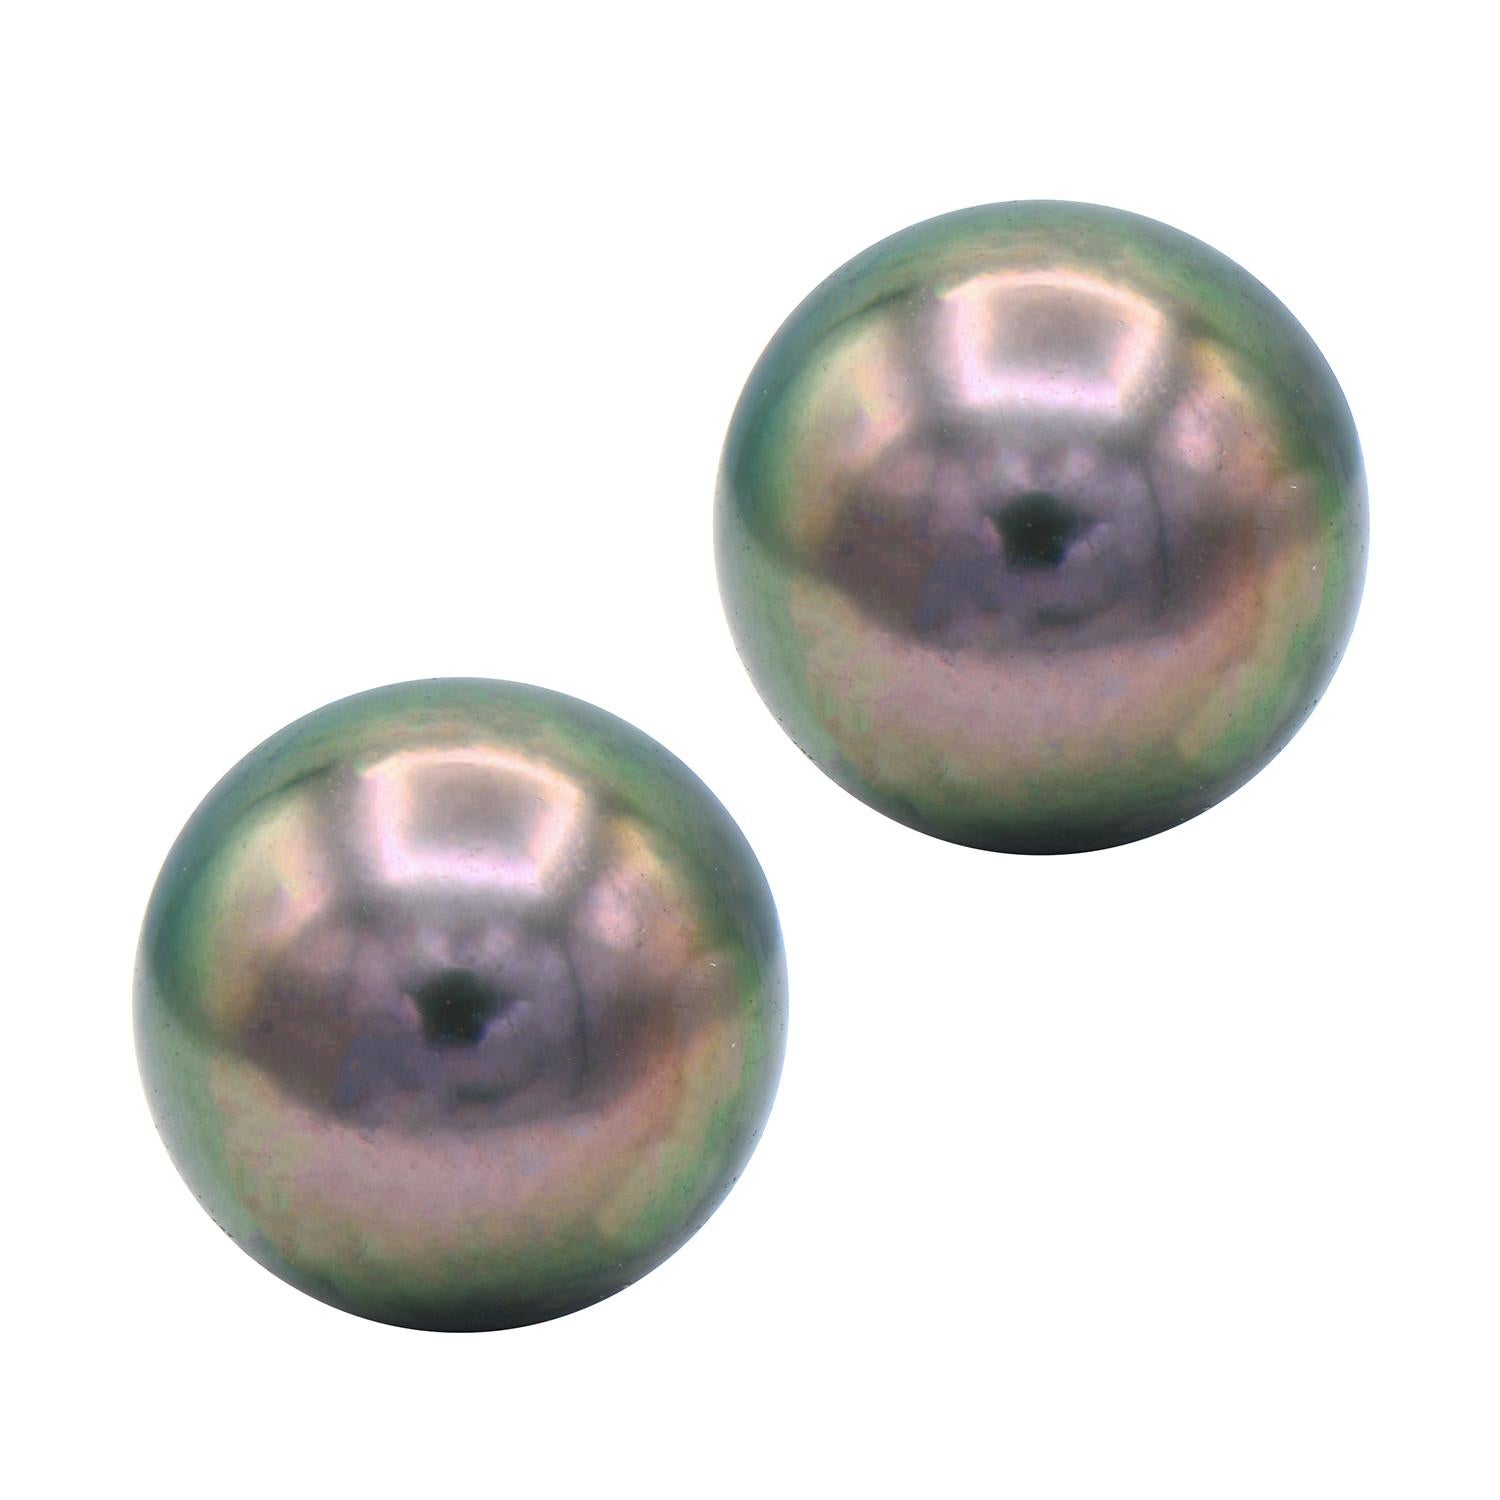 Tahitian Pearl Studs give a little twist to the classic white pearl studs. The Tahitian Pearl Studs are expertly matched in color, luster, and size to make a perfect pair. These 10.5-11mm beautiful pearls are set in 14 karat white gold.